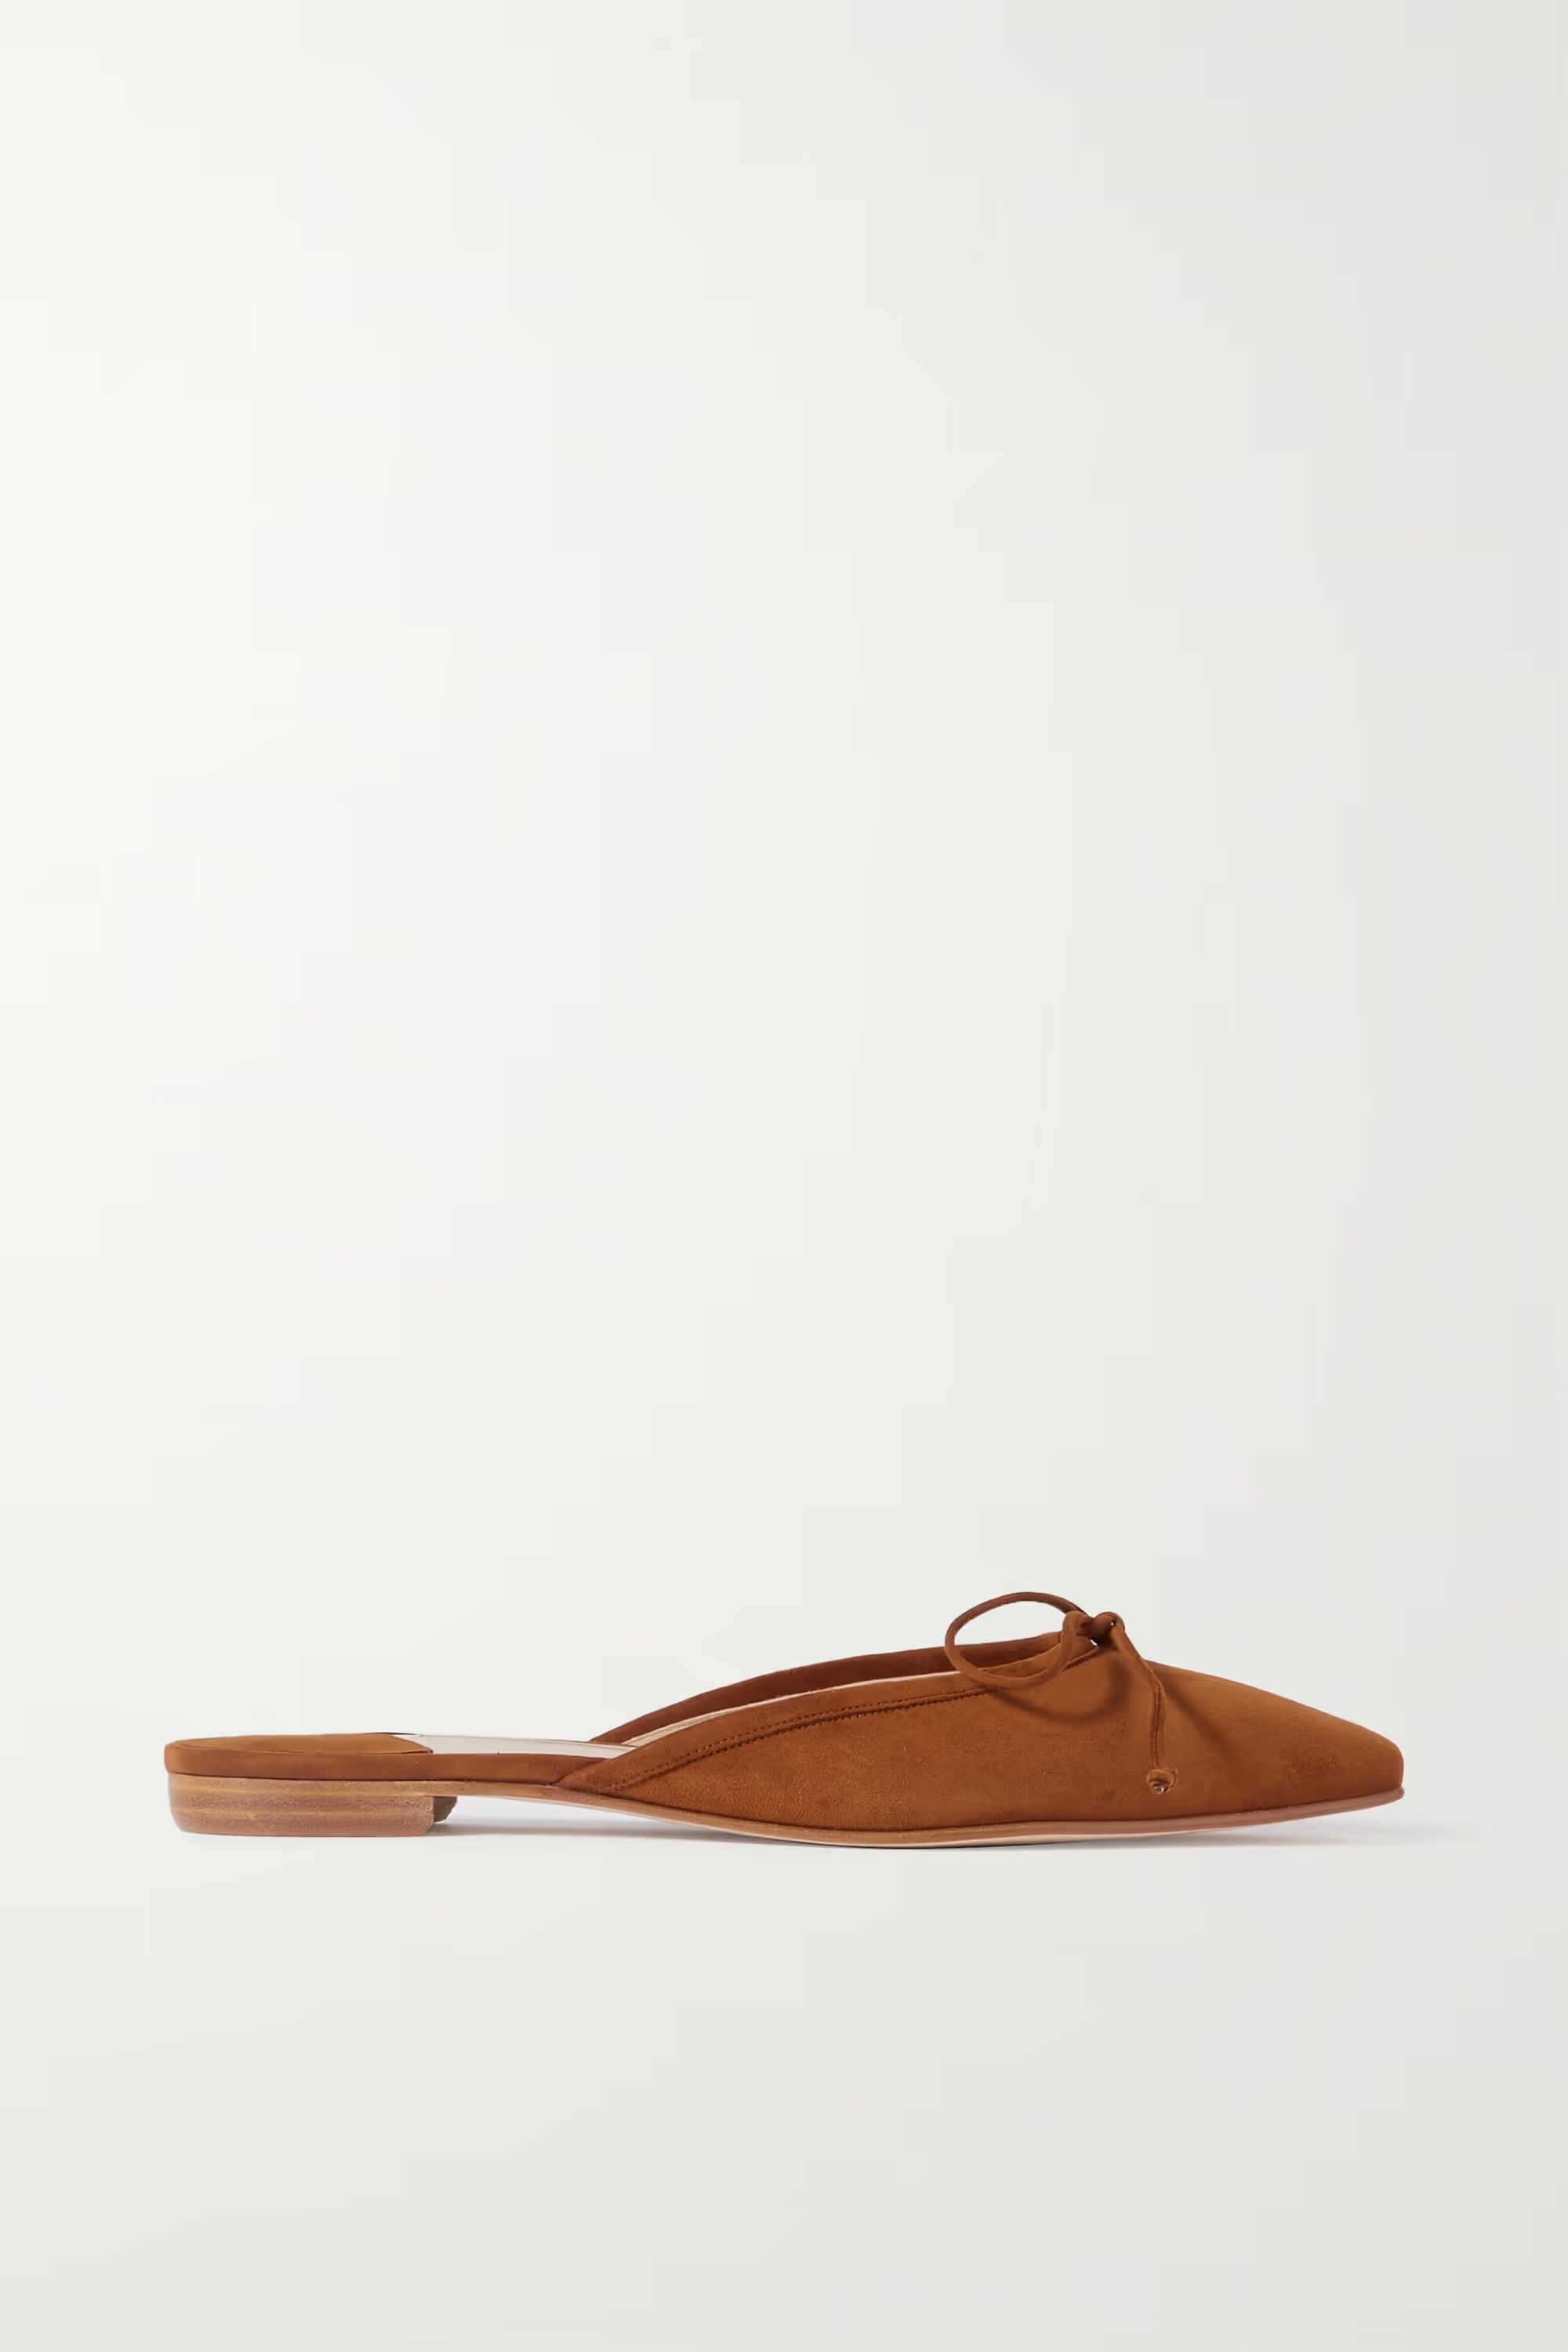 Ballerimu bow-detailed suede mules | NET-A-PORTER (US)